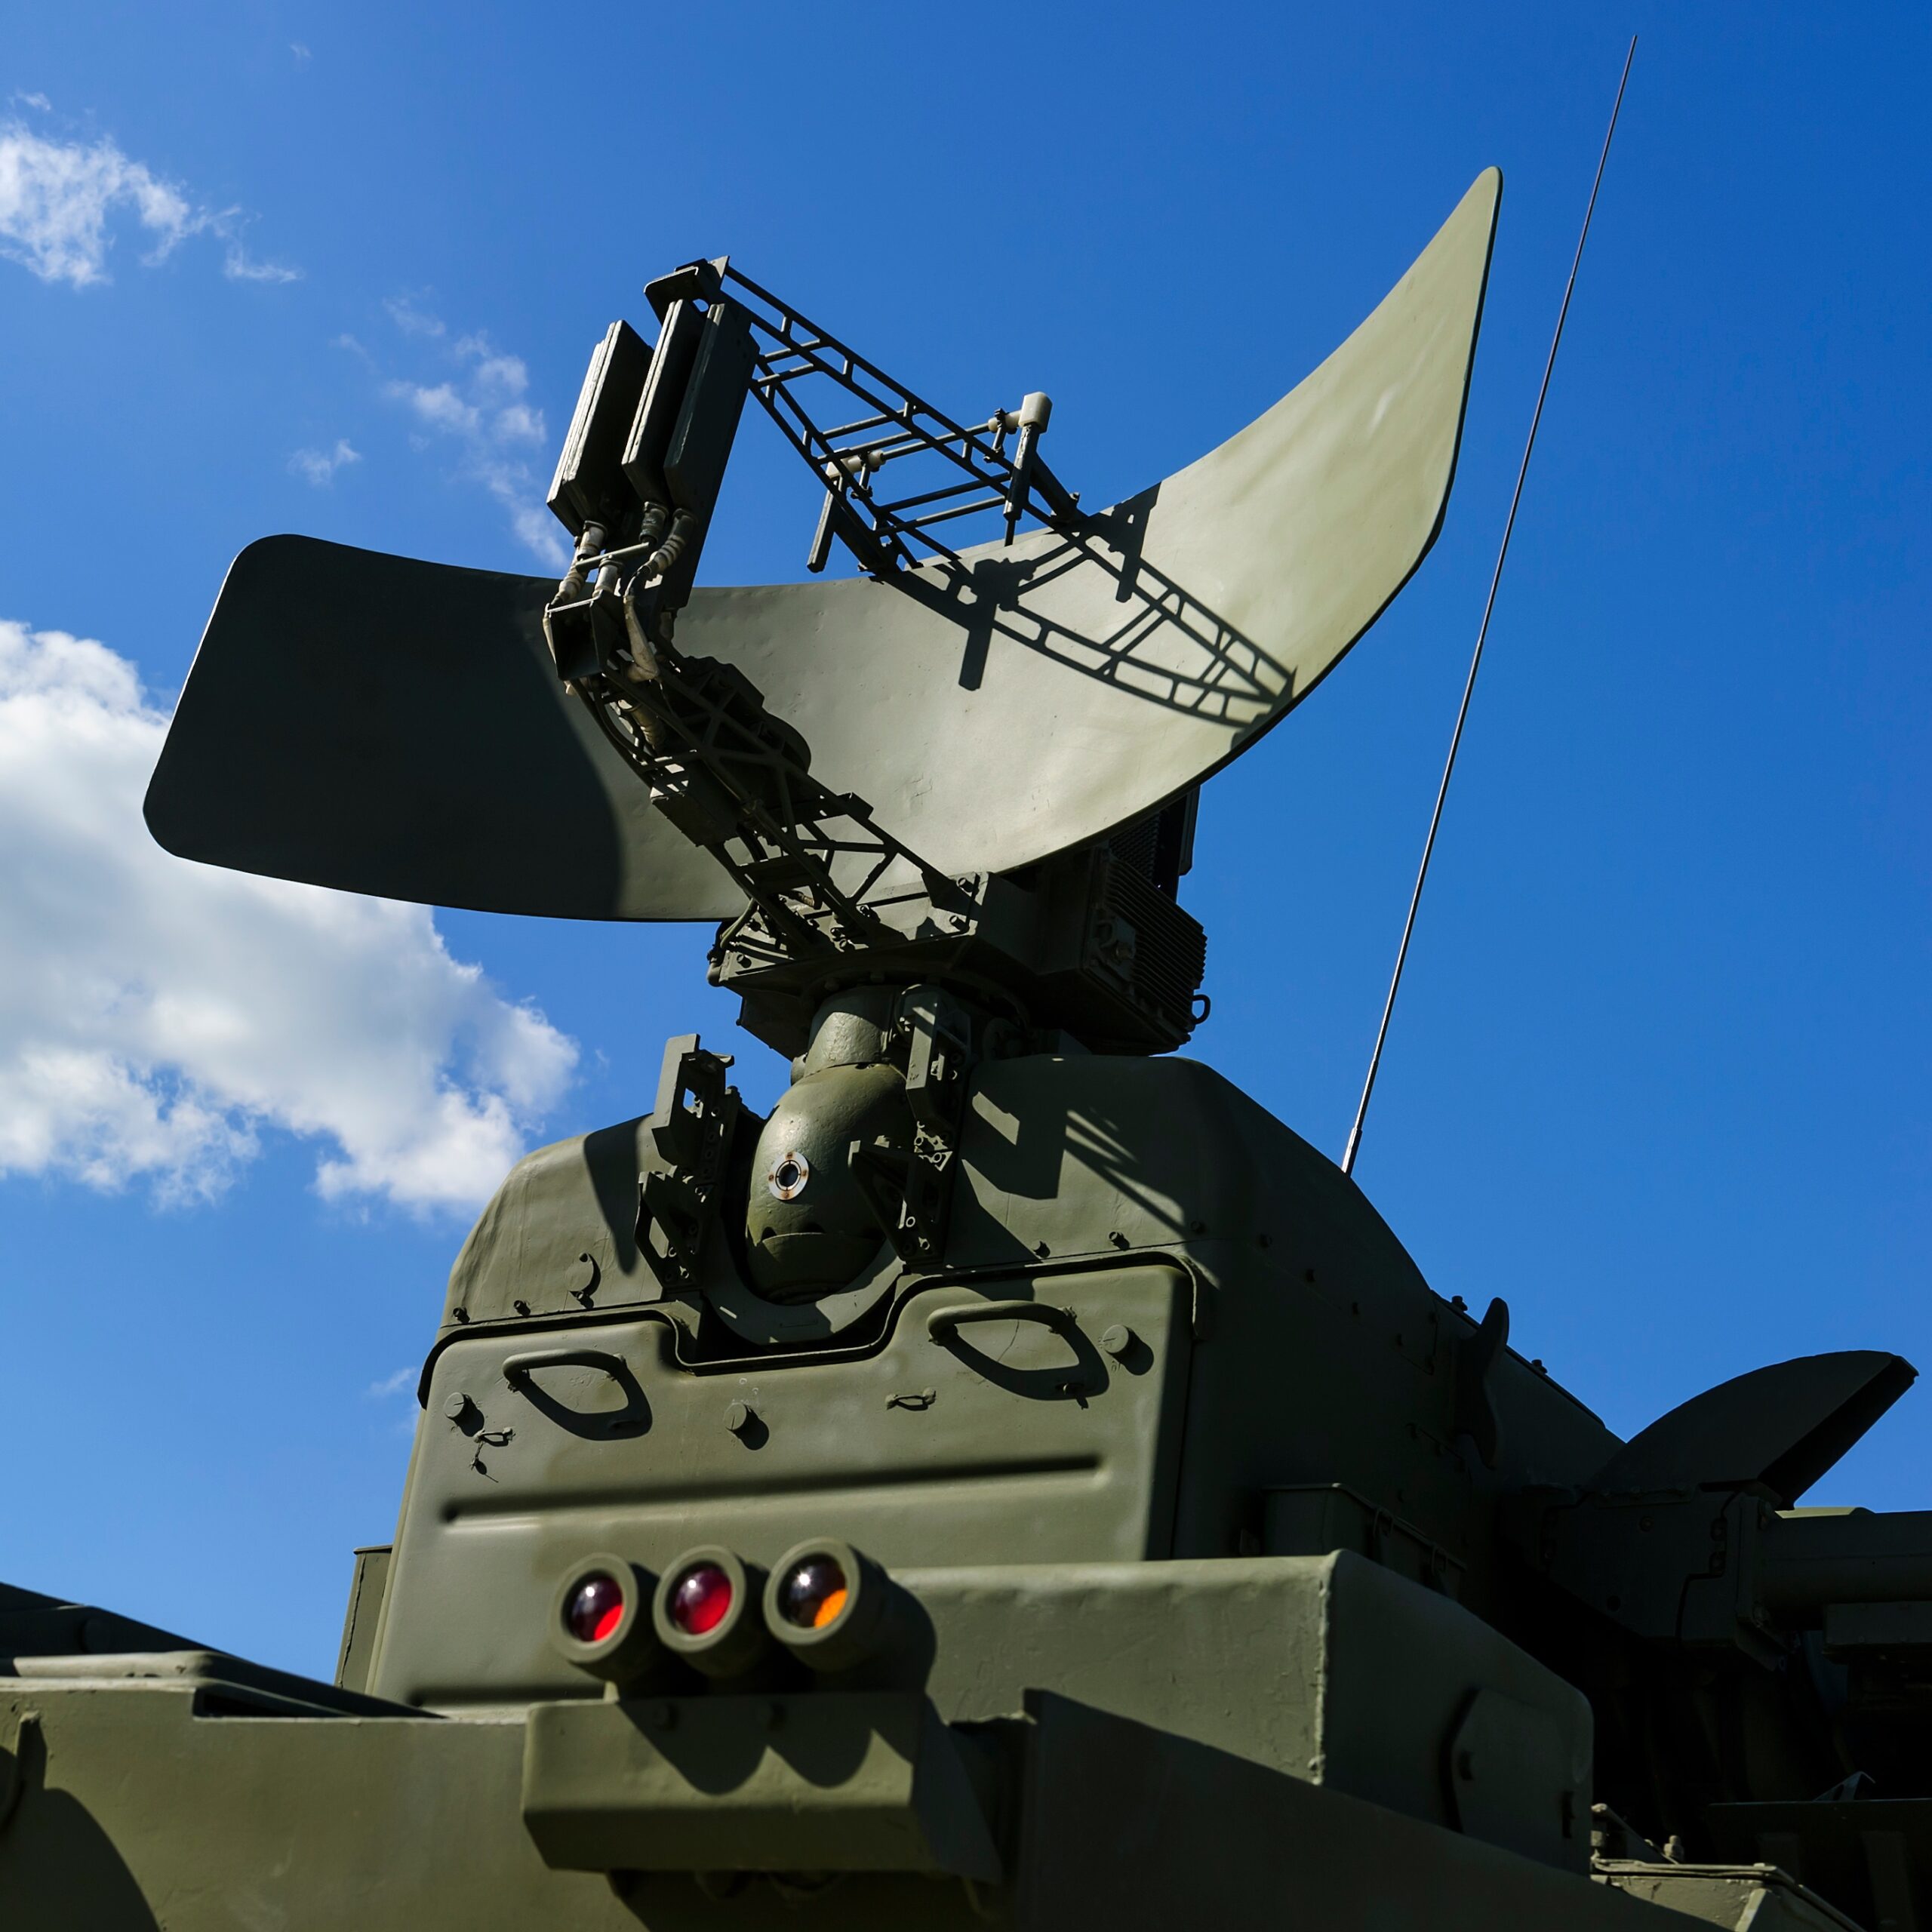 Radar system installed on a green military vehicle.